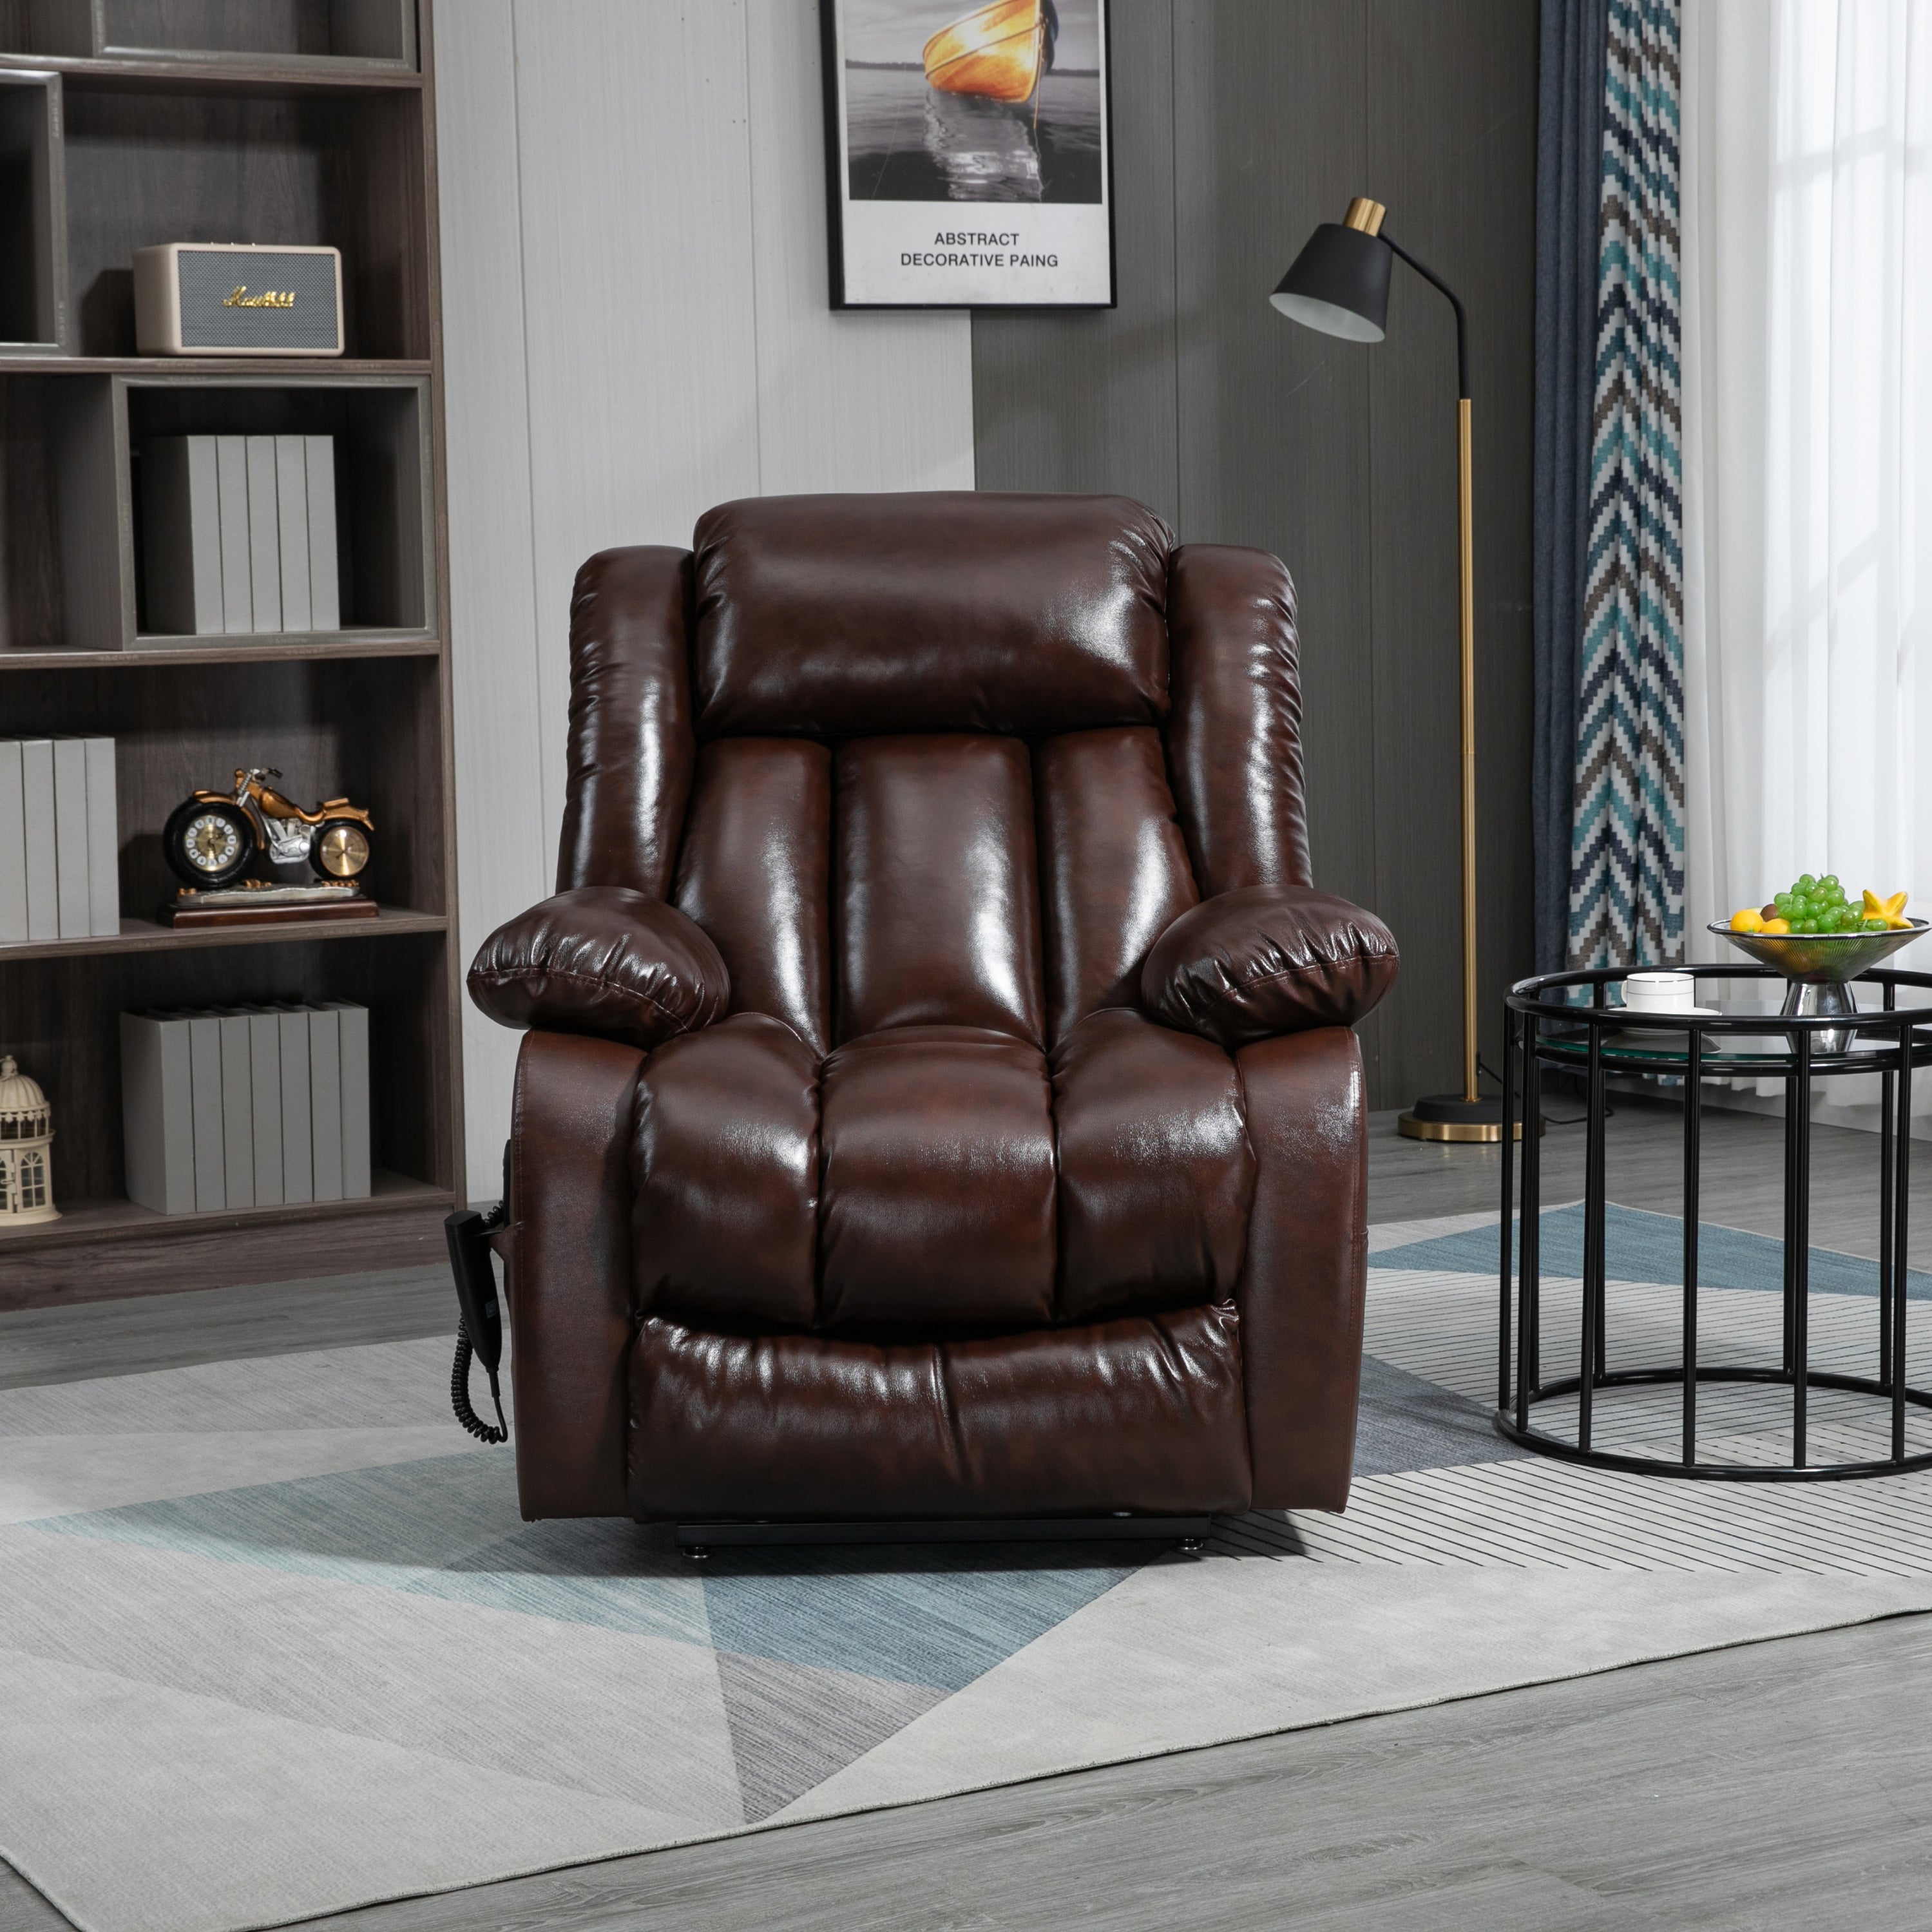 Medium Size Infinite Position Brown Leather Power Lift Recliner Chair with Massage and Heat